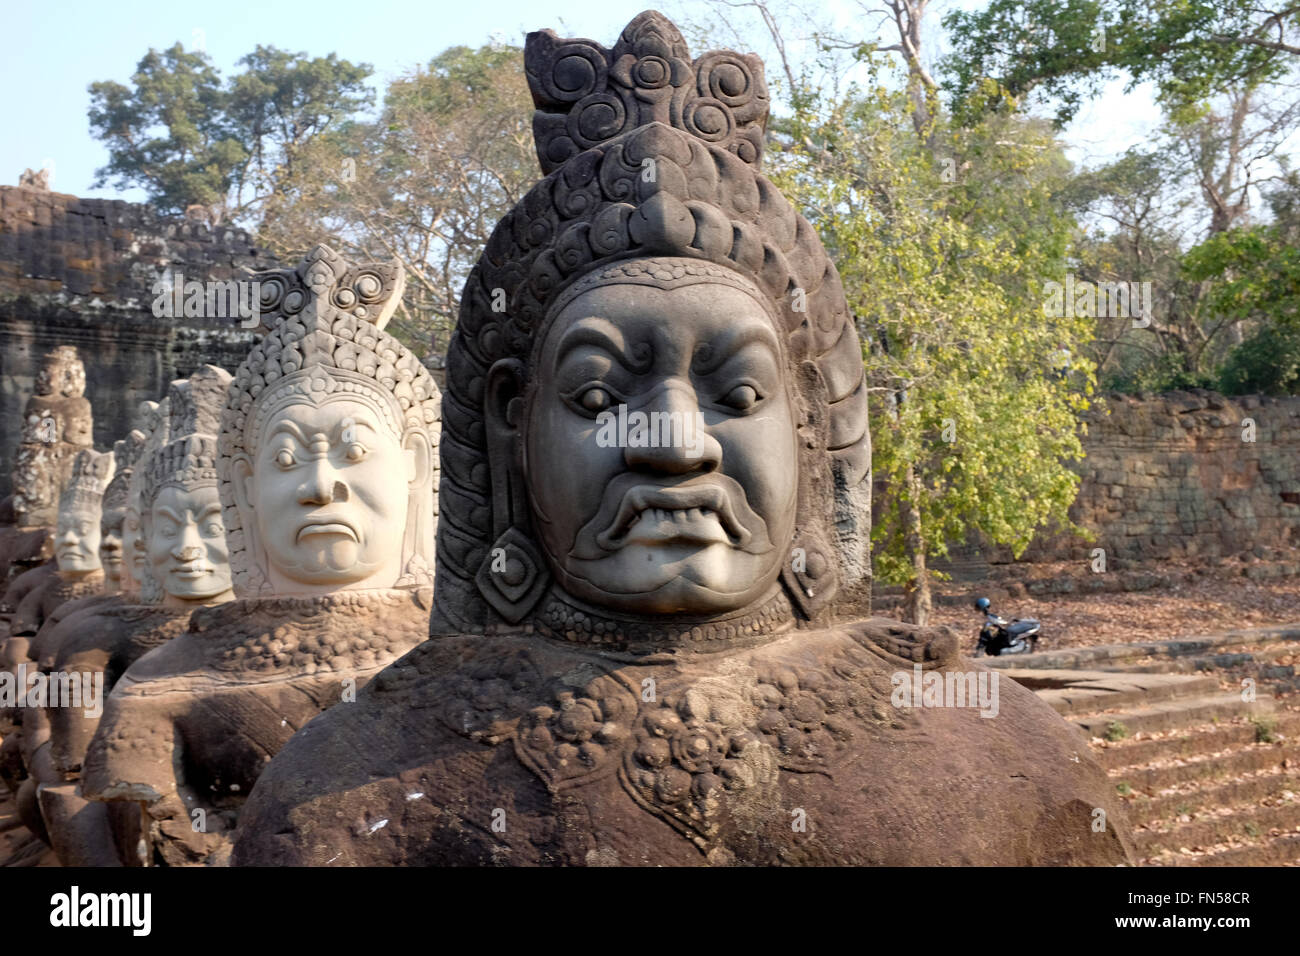 Statues with interesting faces line the entrance to Angkor Thom Temple Complex near Siem Reap, Cambodia Stock Photo